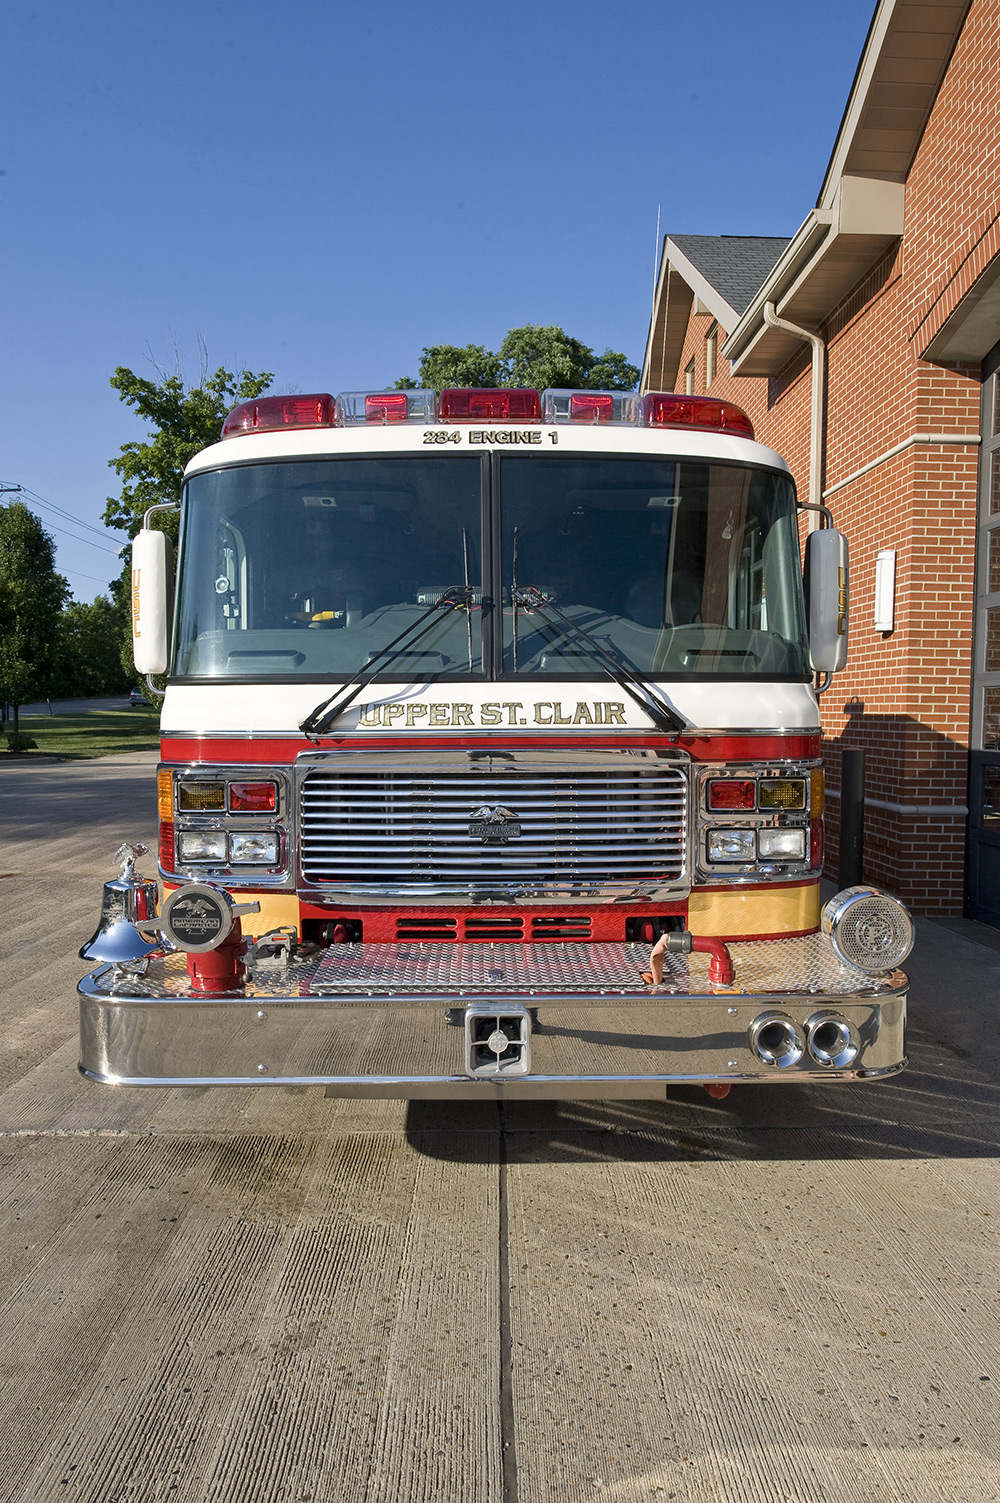 USCVFD 284 Engine 1 Front View